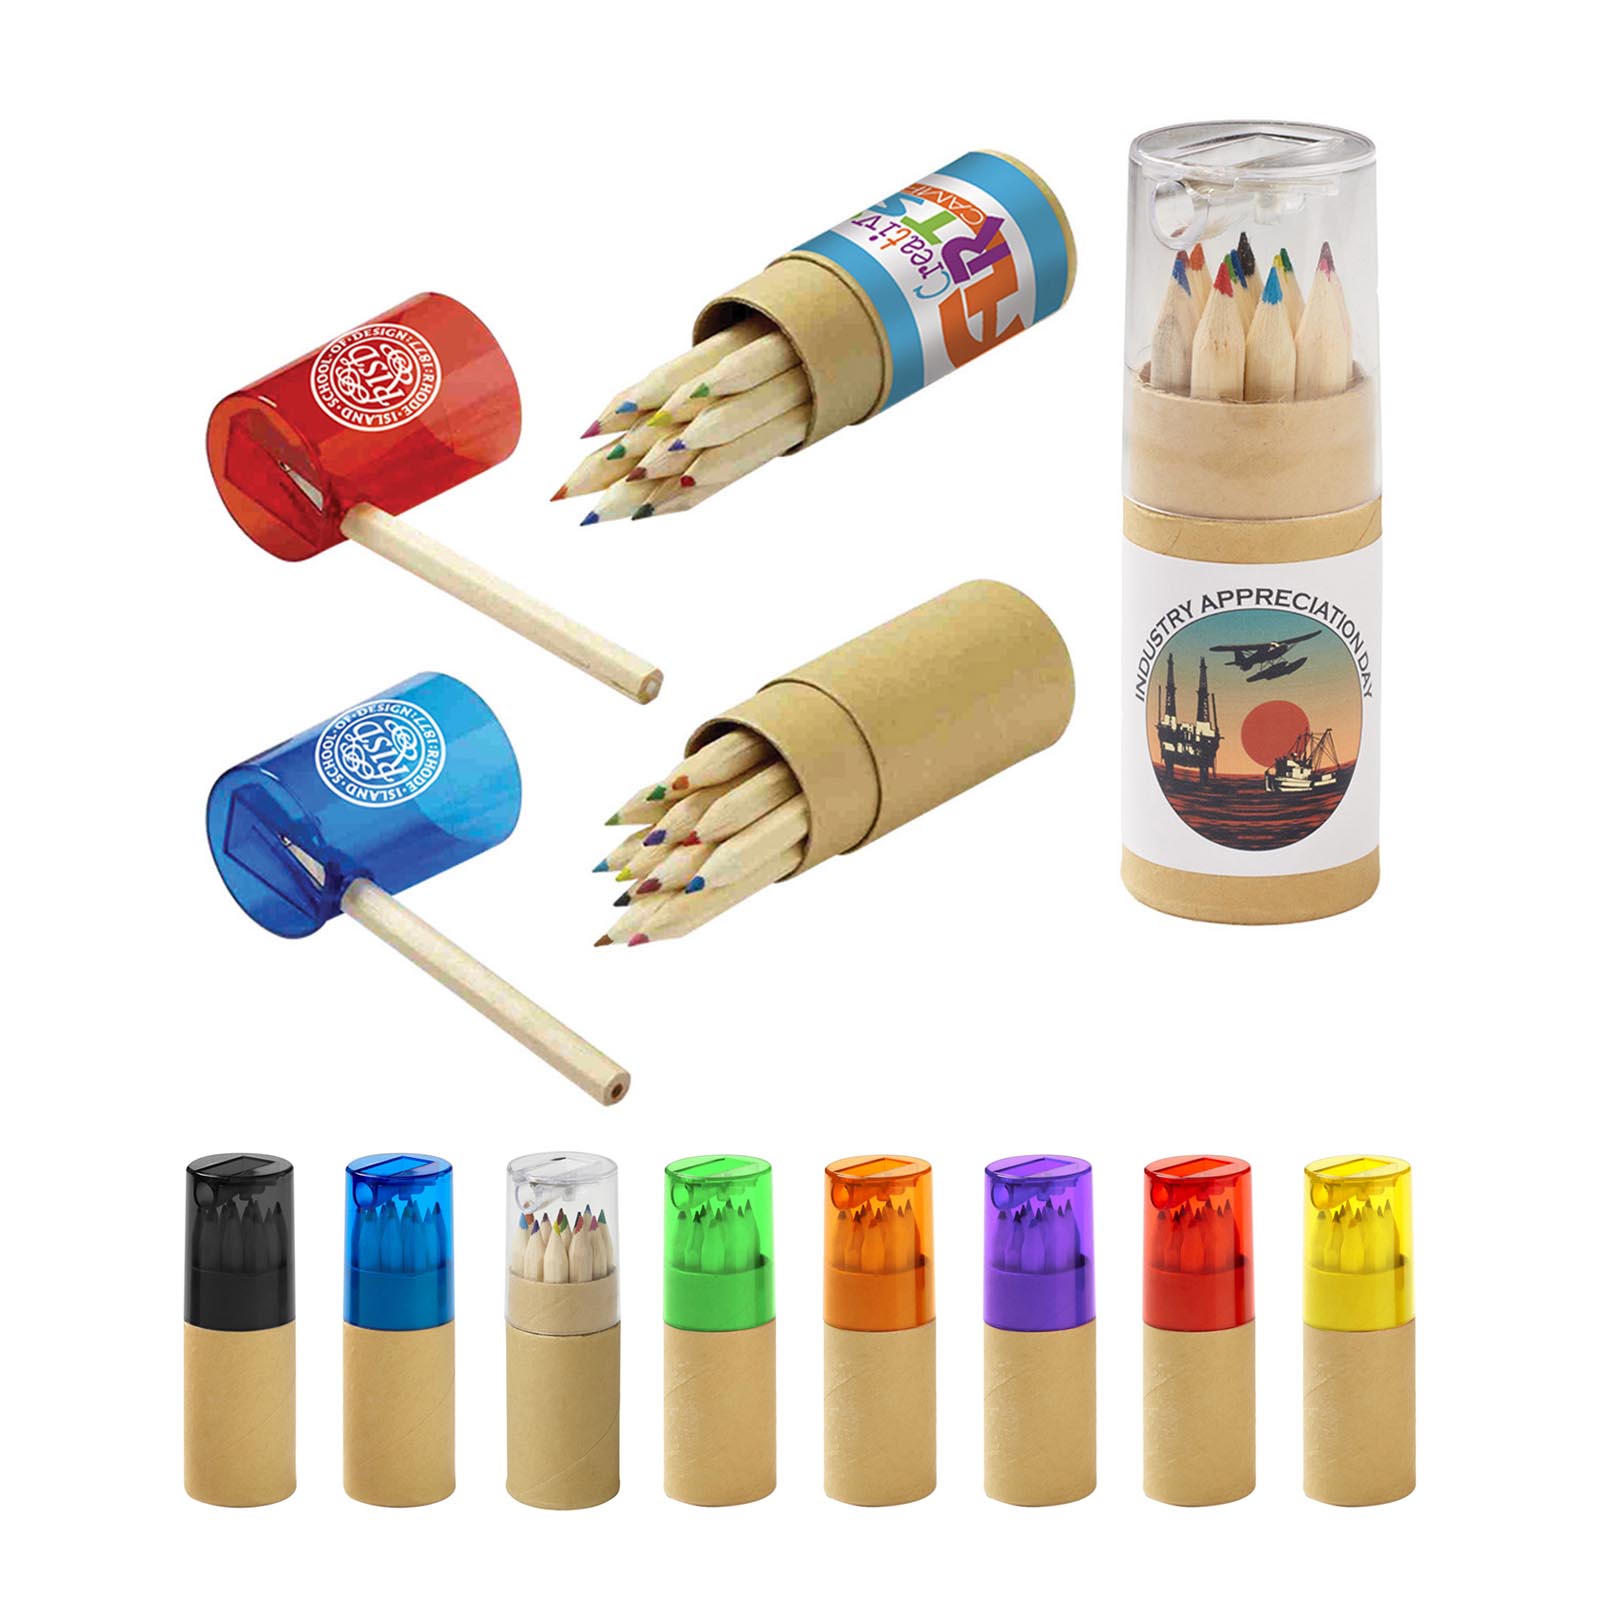 12-Color Pencil Set in Tube with Sharpener